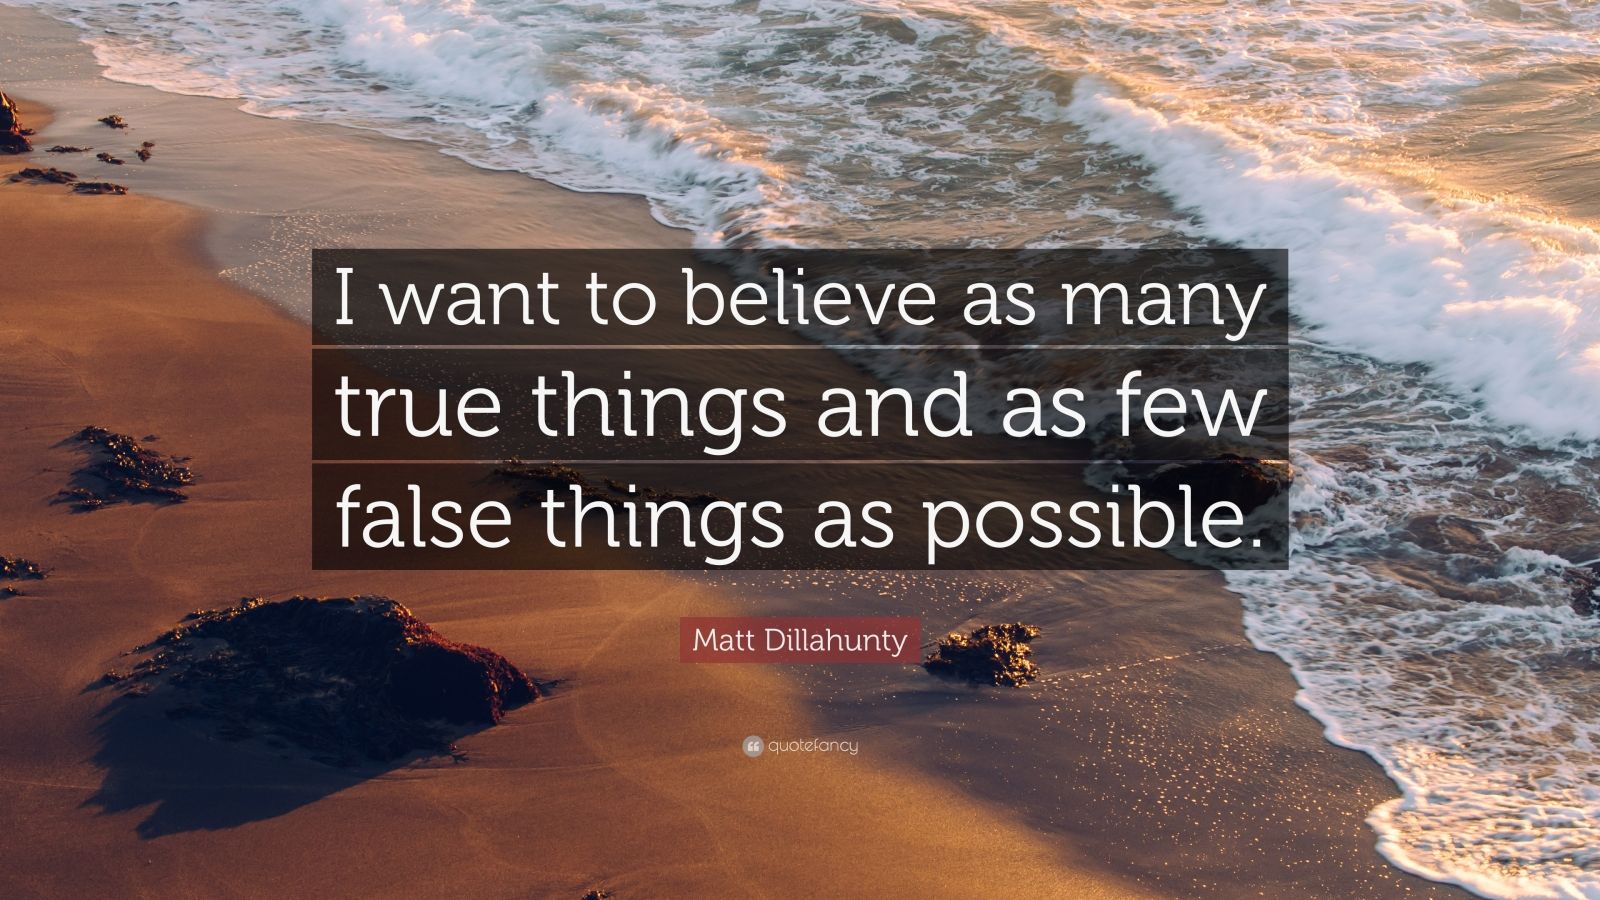 2166096-Matt-Dillahunty-Quote-I-want-to-believe-as-many-true-things-and-as.jpg